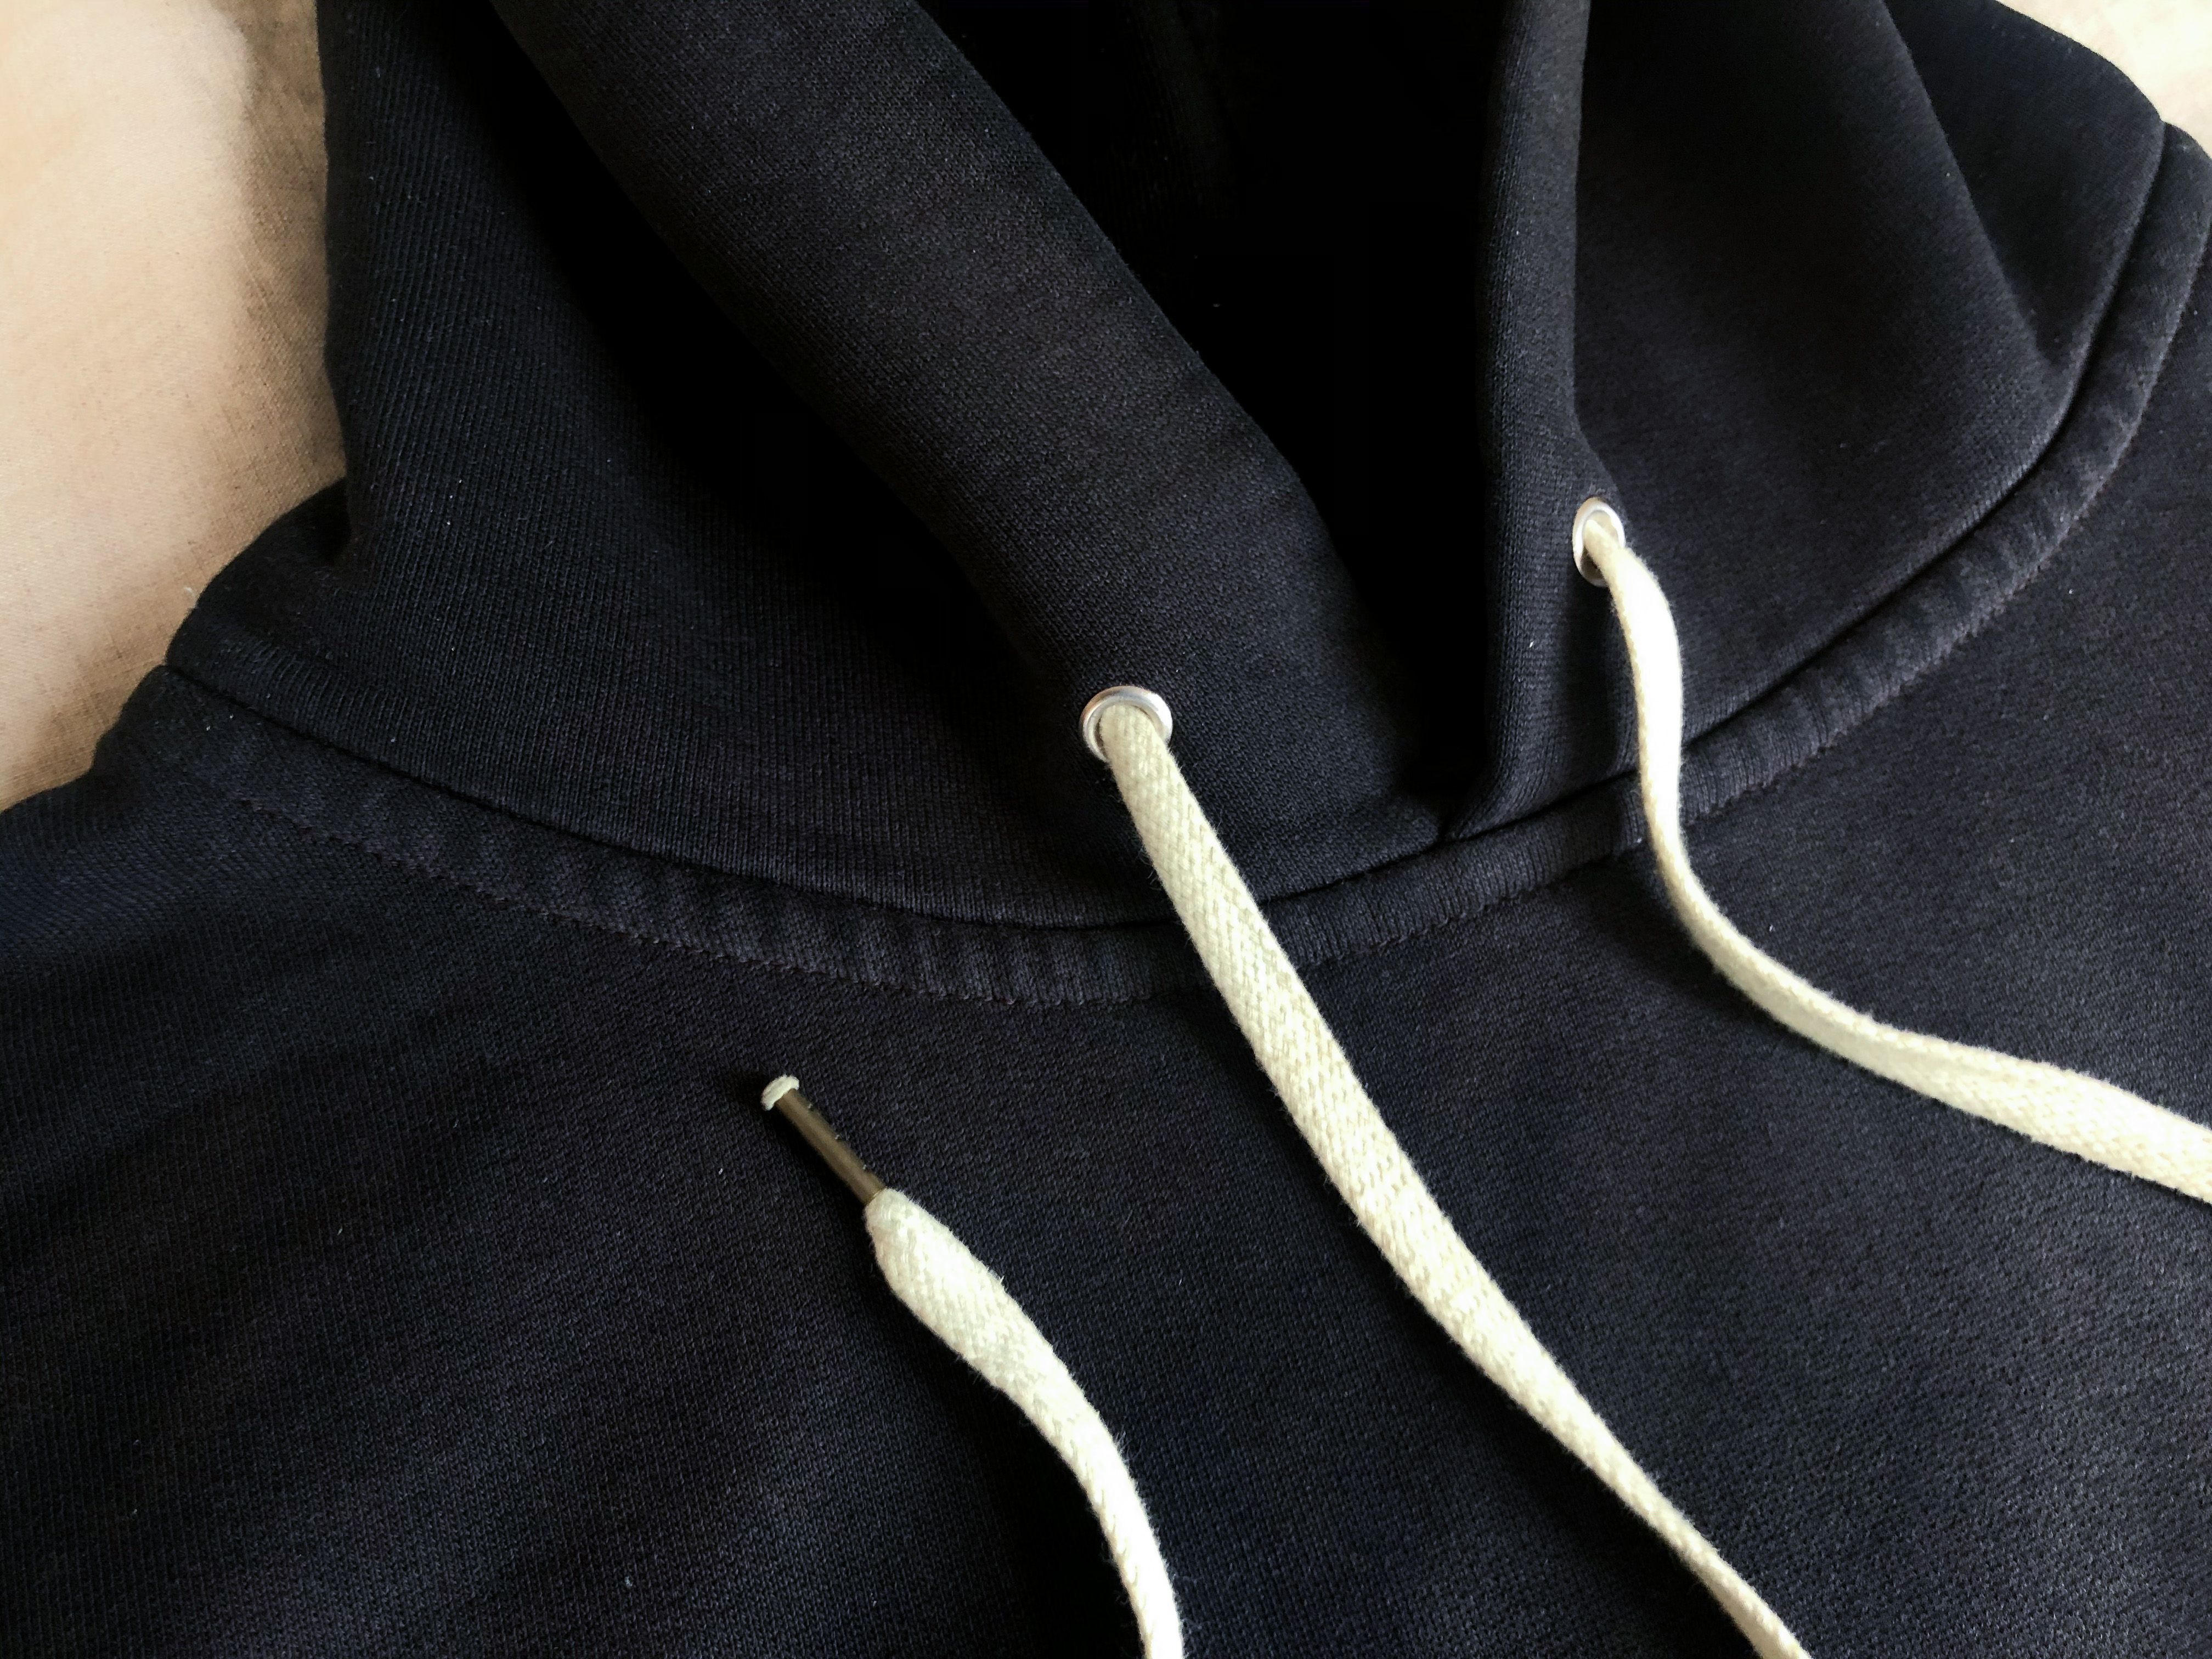 Request] Does anyone know how to retie hoodie strings to look like